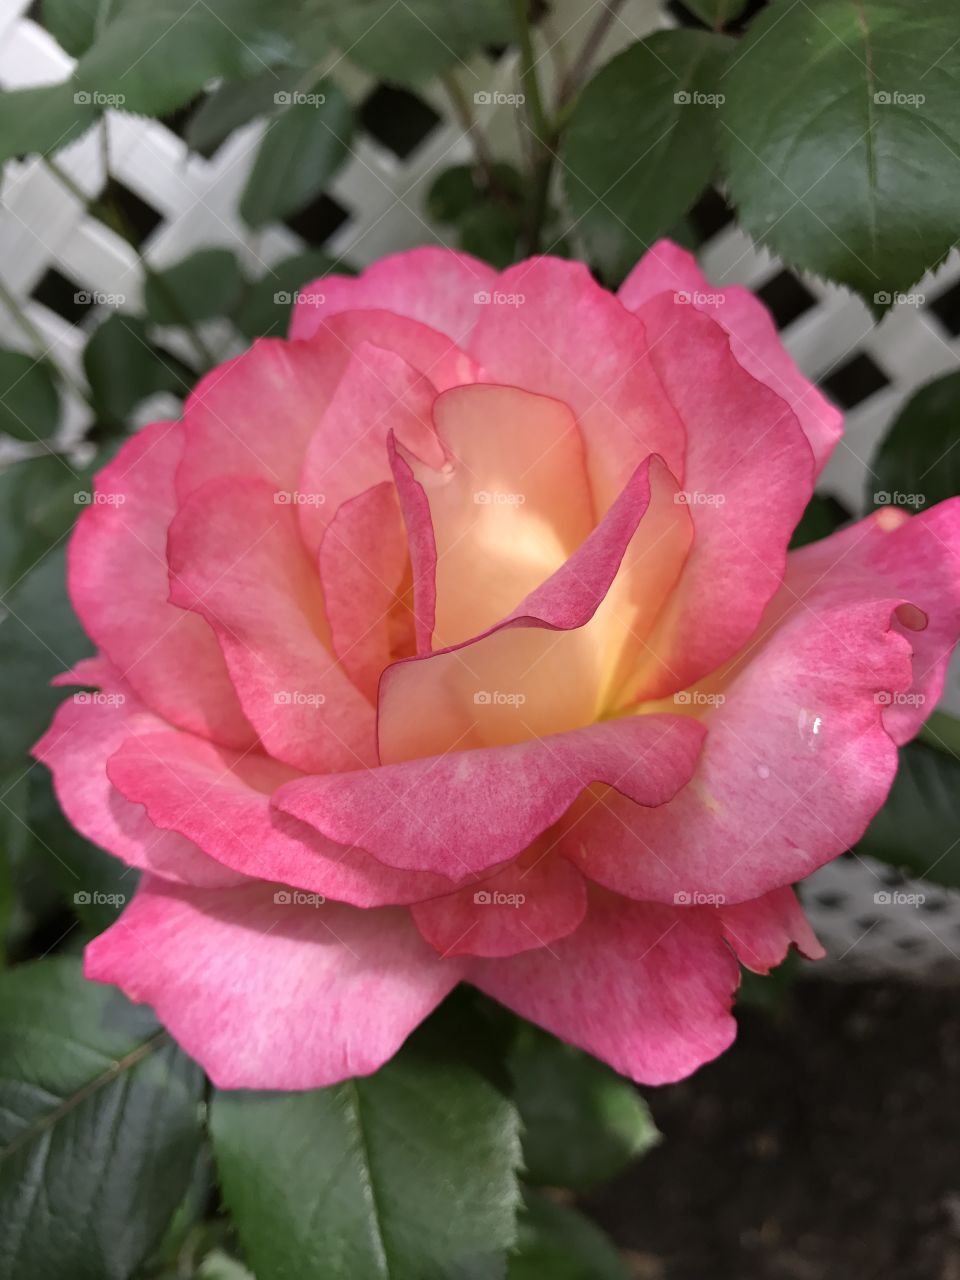 Sunlit pink rose in full bloom With a touch of yellow in the center 